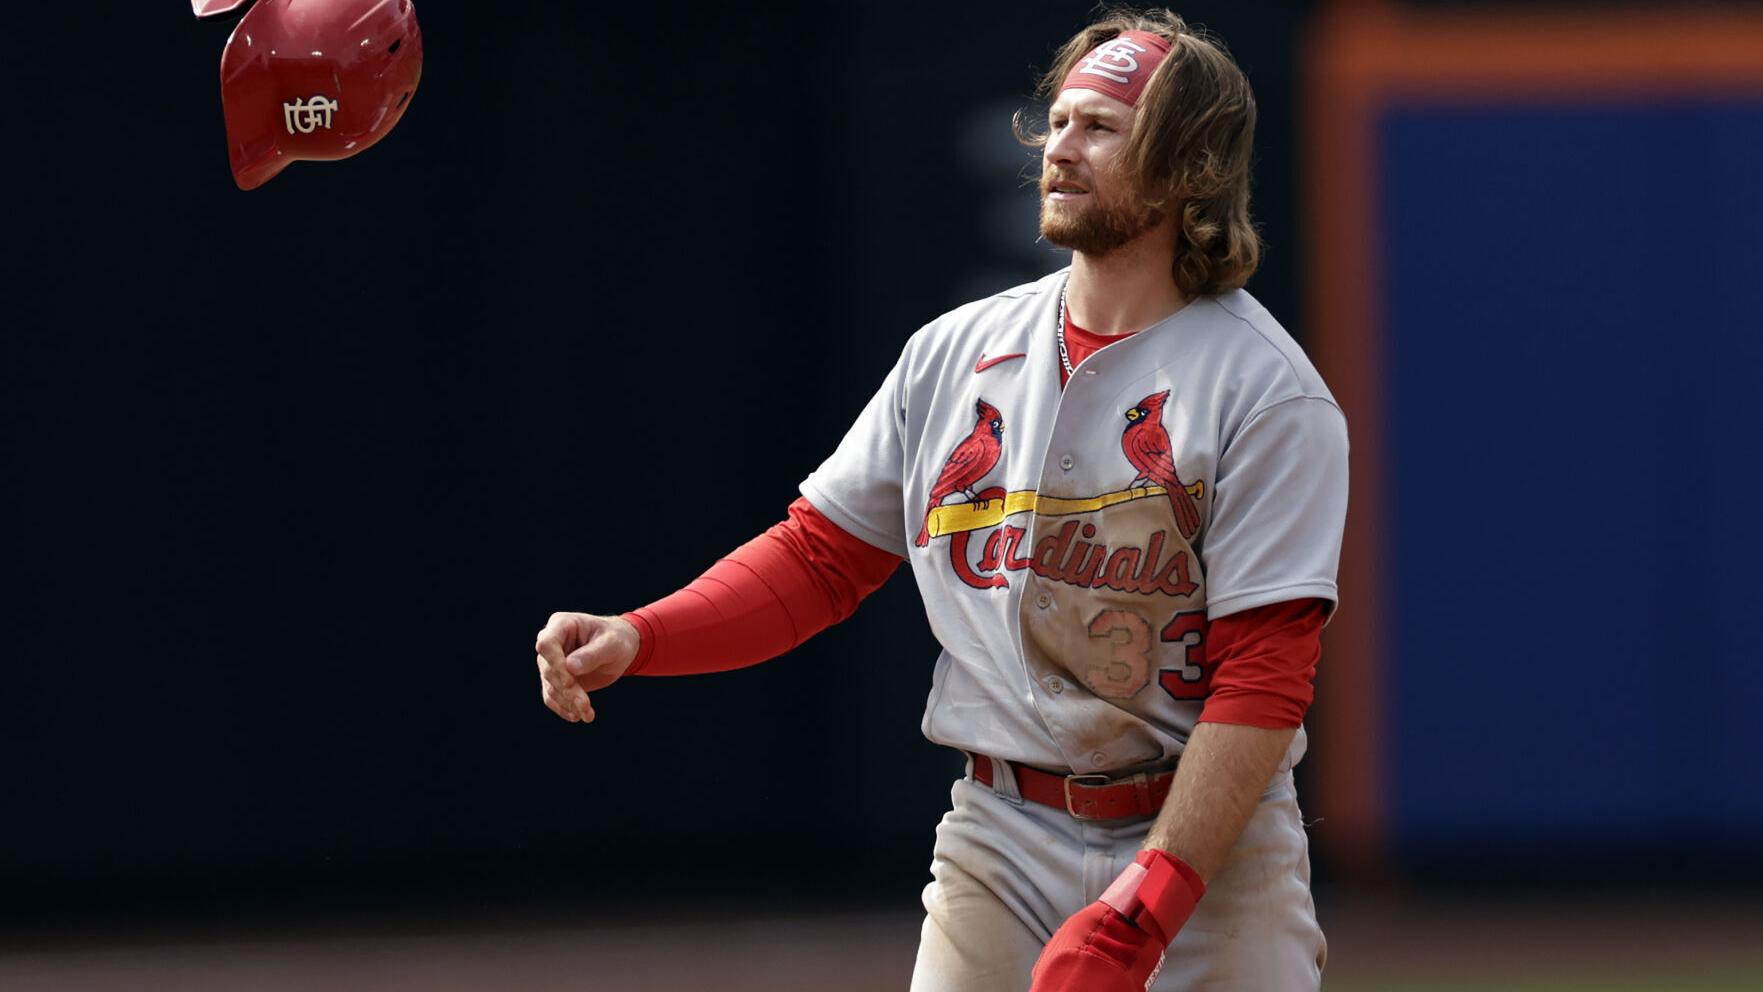 Donovan returns to shortstop, bats second, but Cardinals encouraged by how Sosa's ankle feels